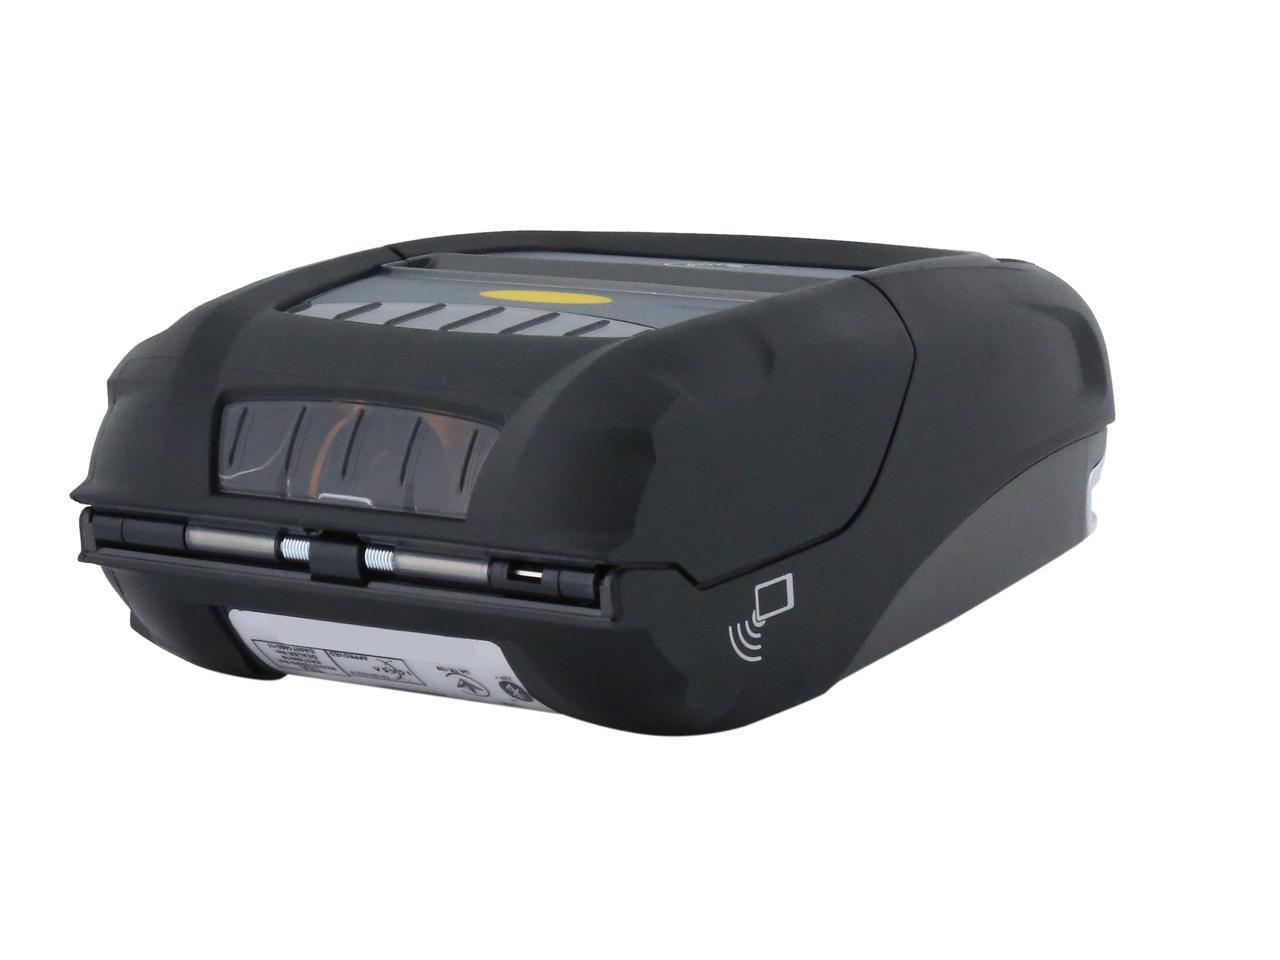 Zebra Zq510 3 Mobile Direct Thermal Receipt And Label Printer 203 Dpi Bluetooth 40 Linered 9556